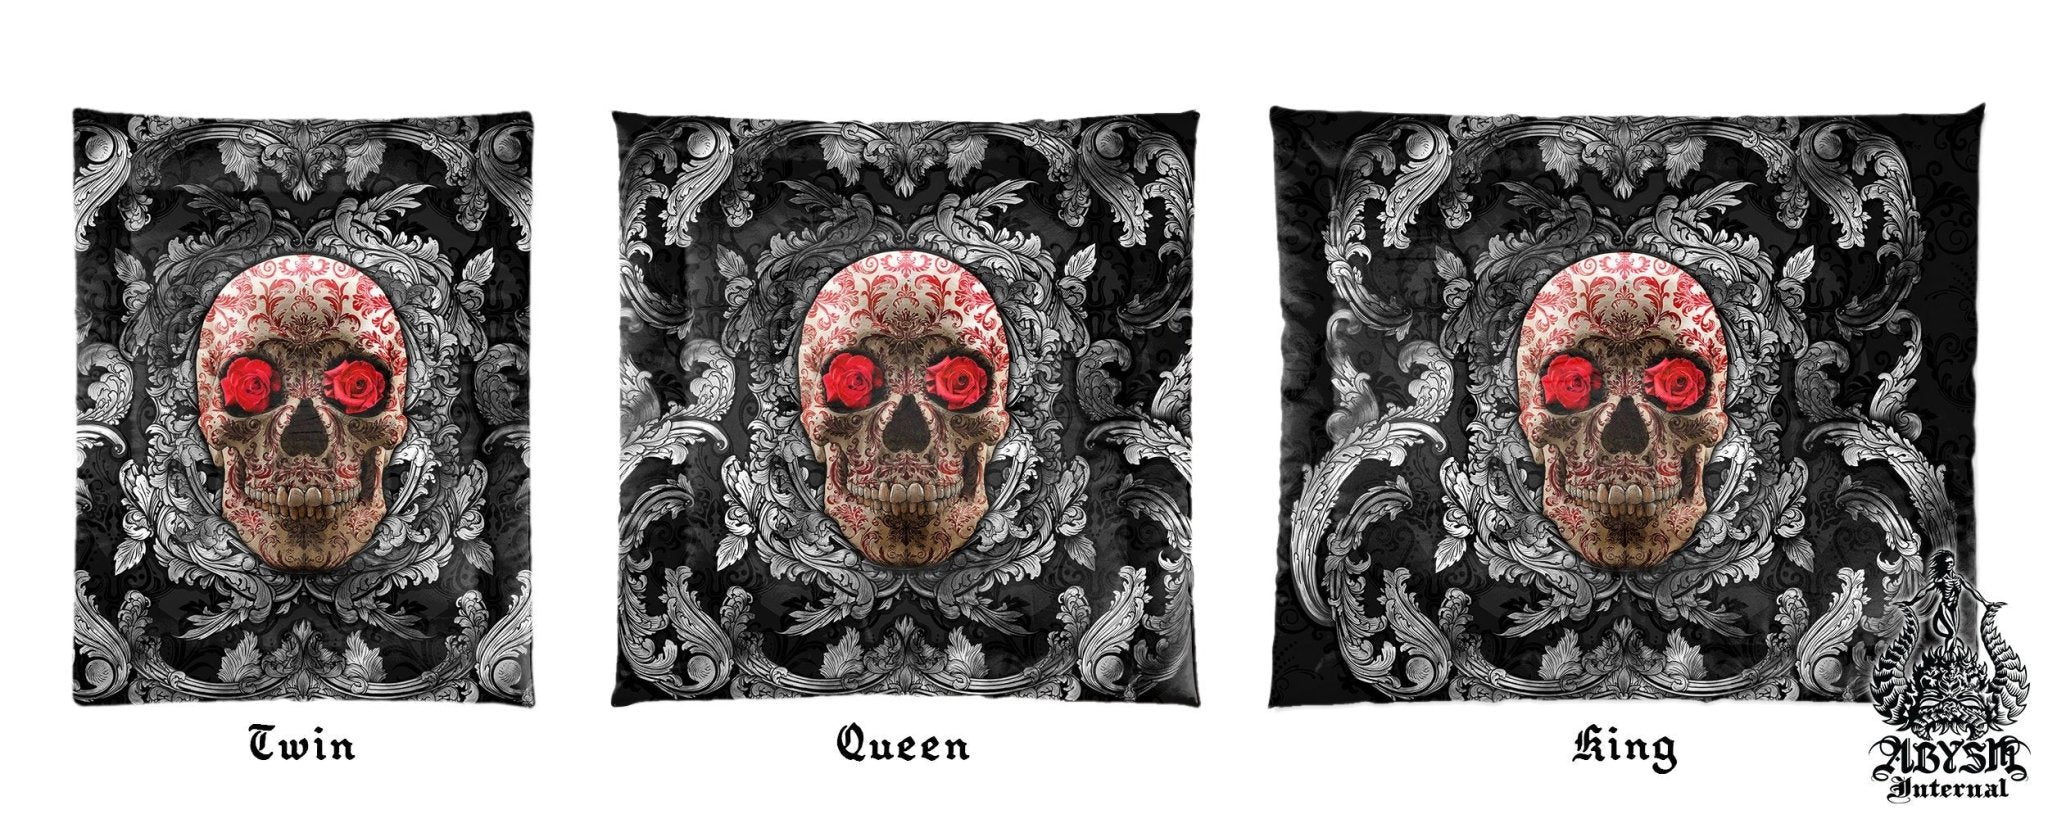 Skull Bedding Set, Comforter and Duvet, Goth Bed Cover and Bedroom Decor, King, Queen and Twin Size - Silver and Red - Abysm Internal